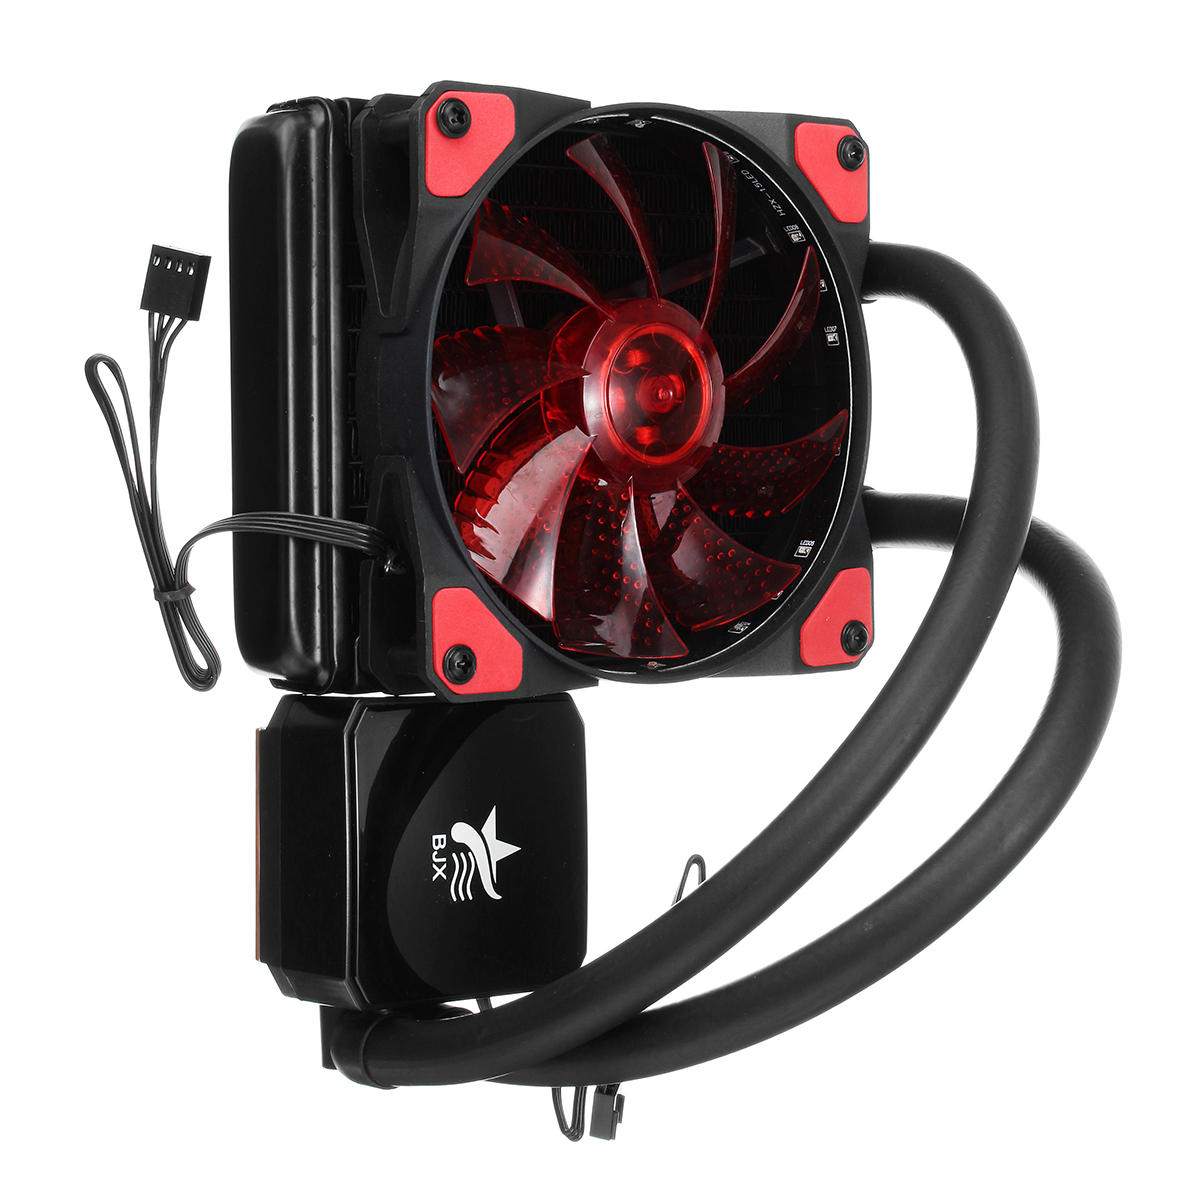 Liquid cpu cooler water cooling system 